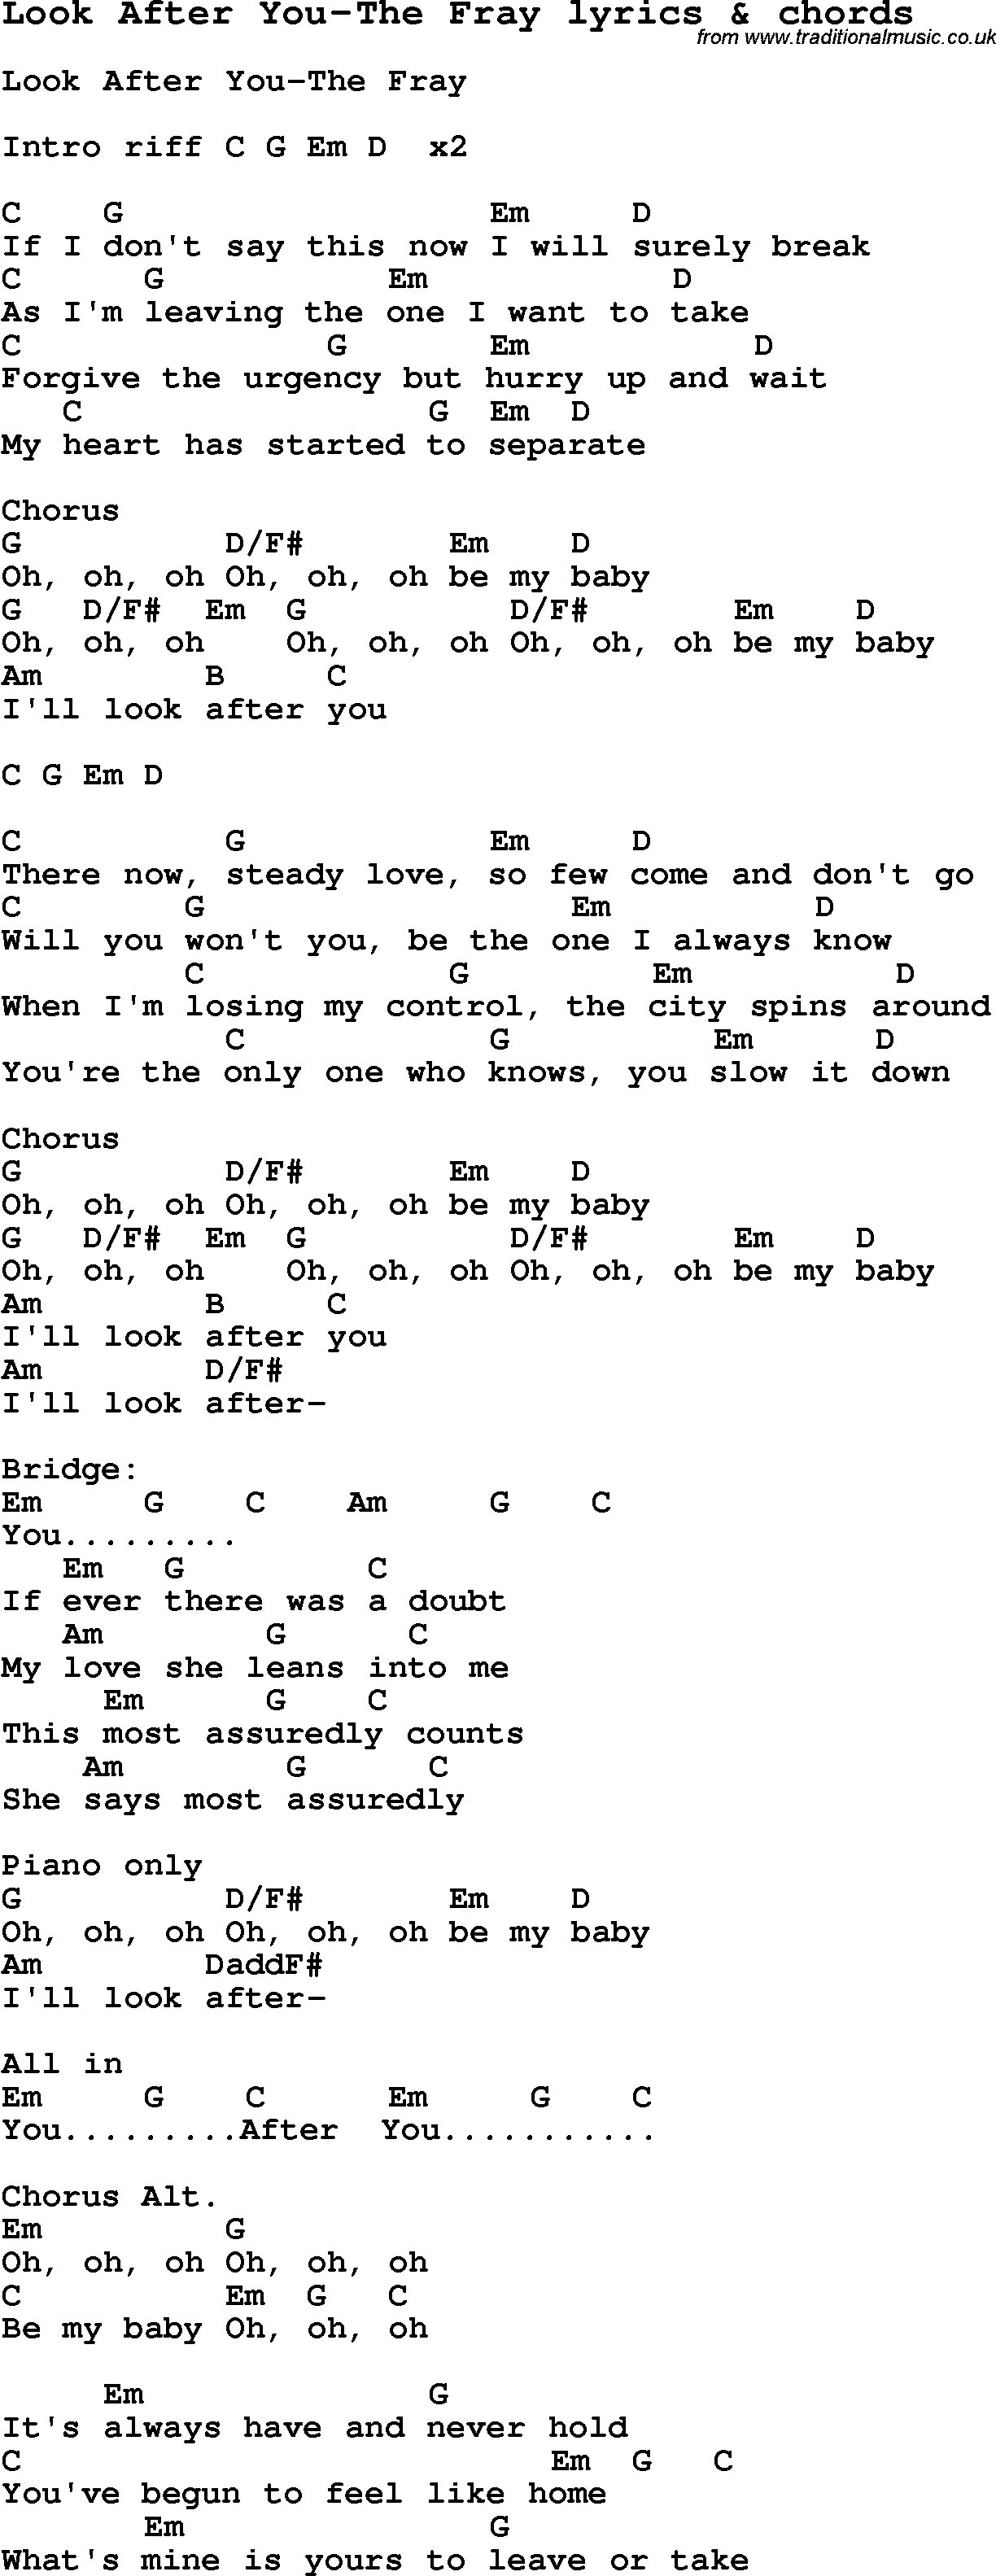 Love Song Lyrics for: Look After You-The Fray with chords for Ukulele, Guitar Banjo etc.